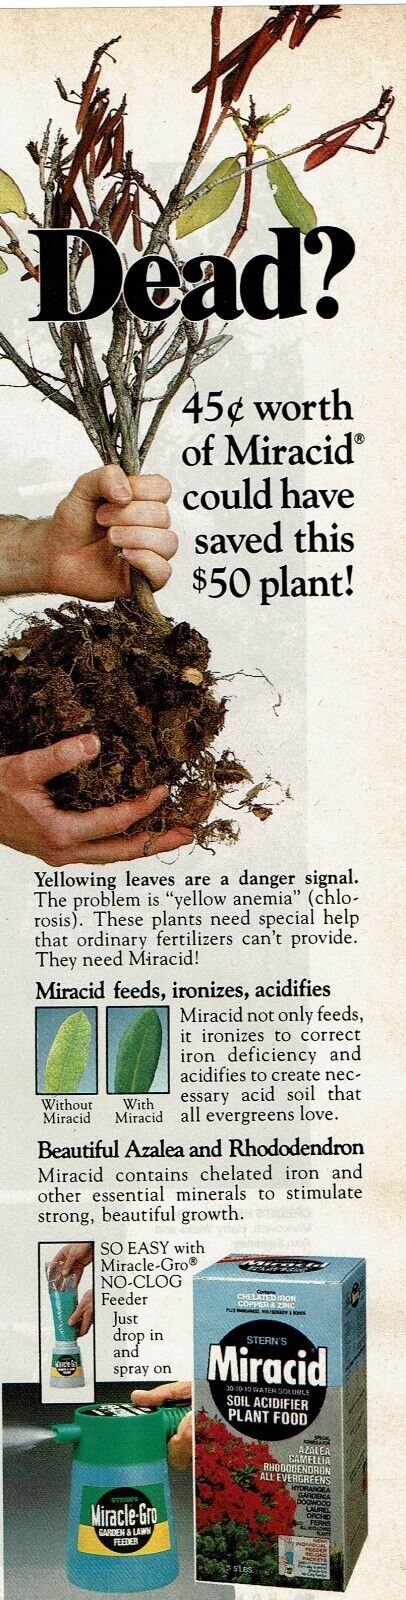 1989 Vintage Print Ad Dead? Miracid could have saved this $50 plant Miracle-Gro